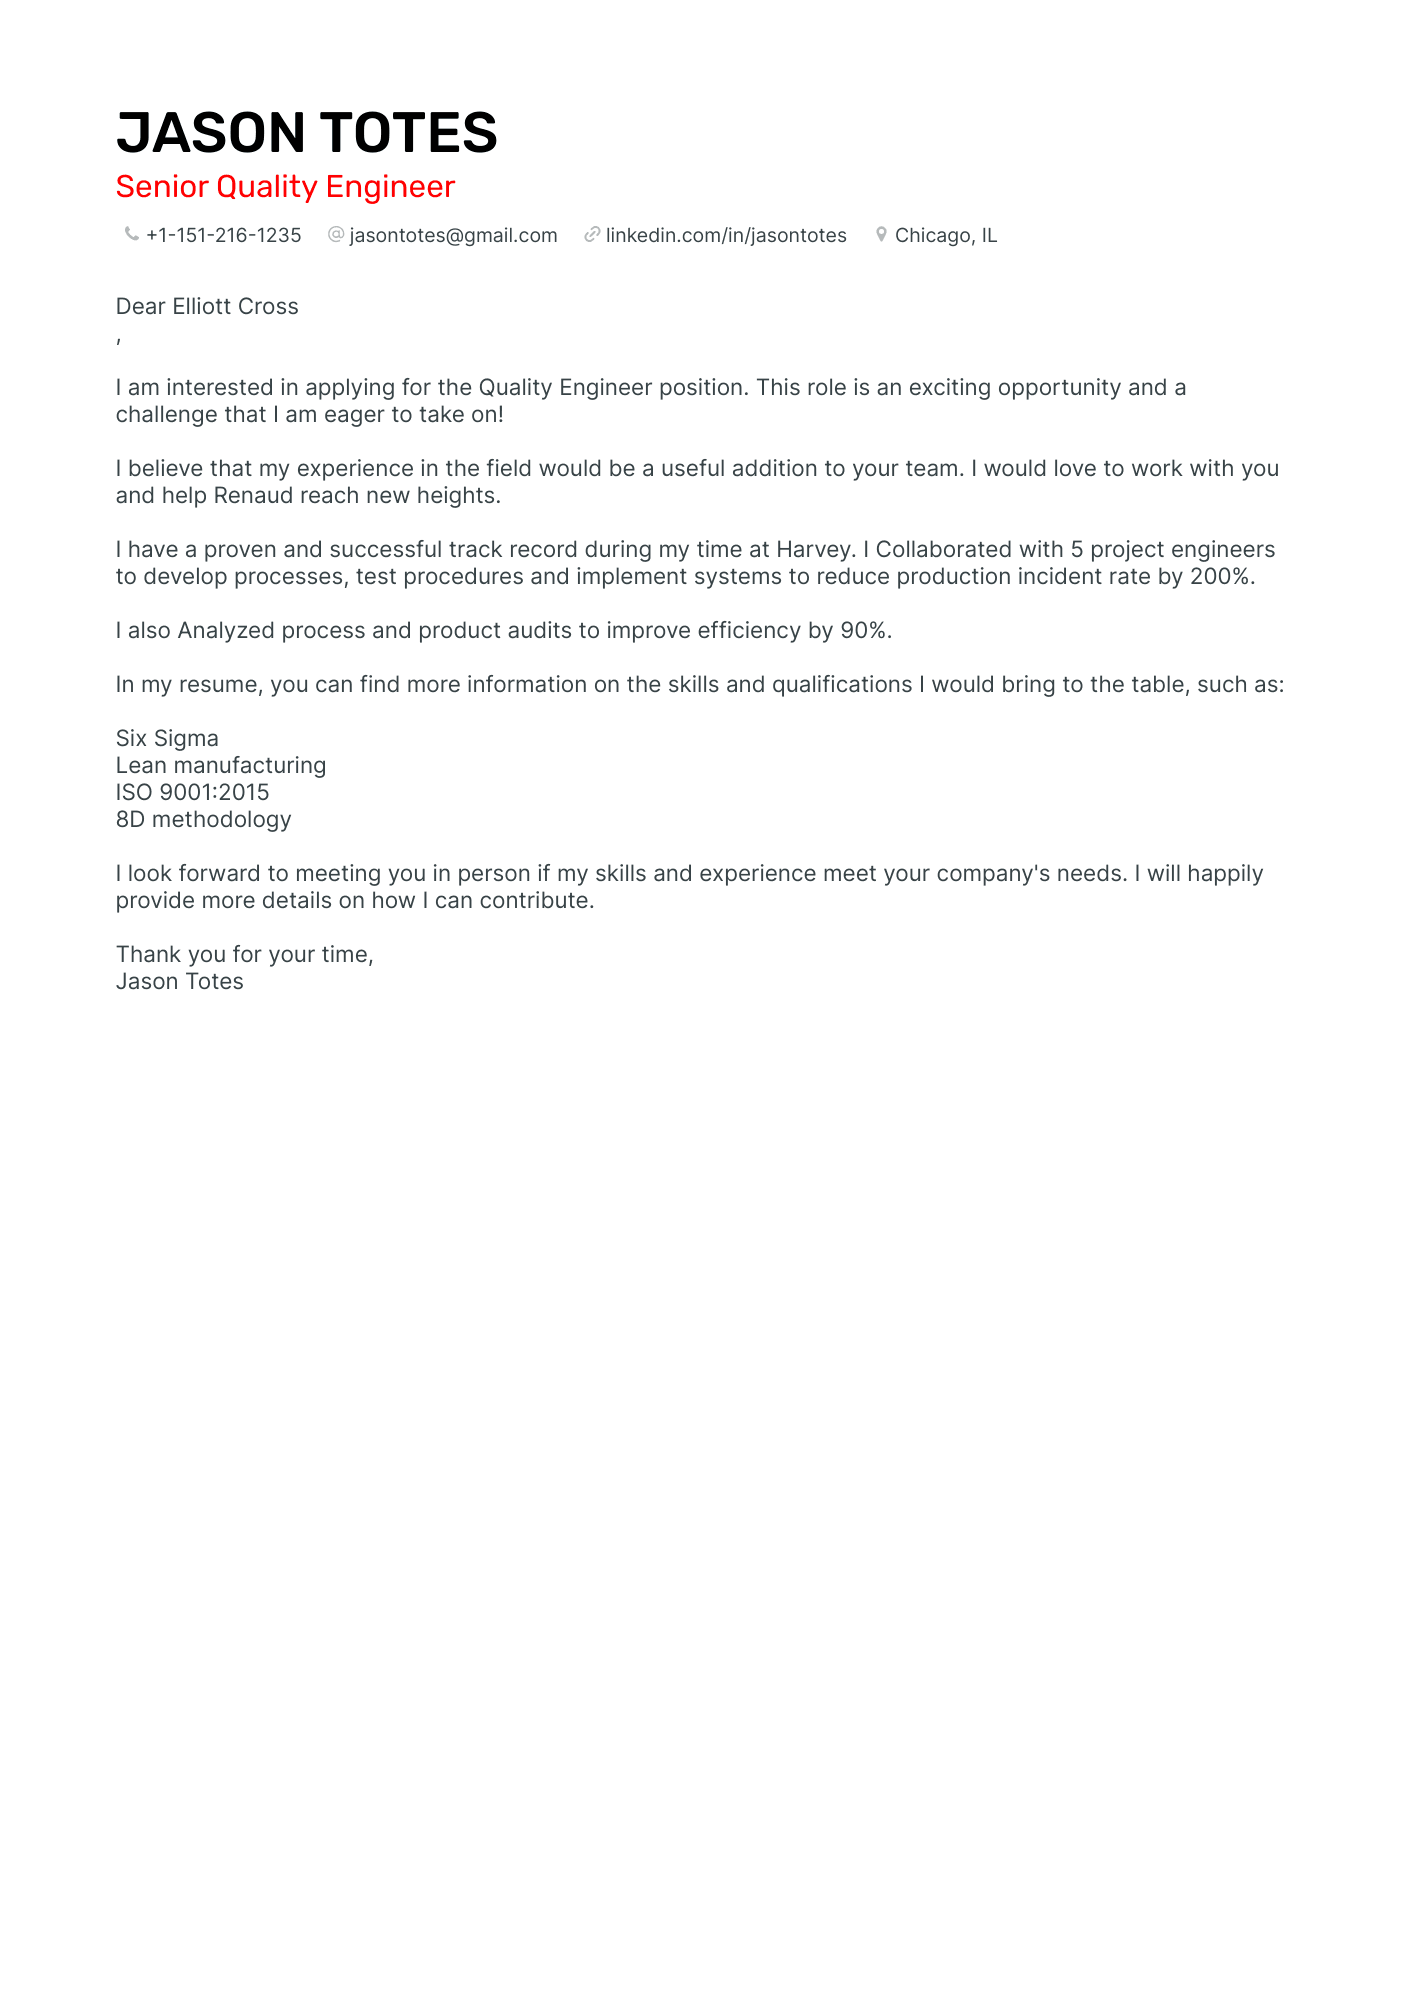 Quality Engineer cover letter